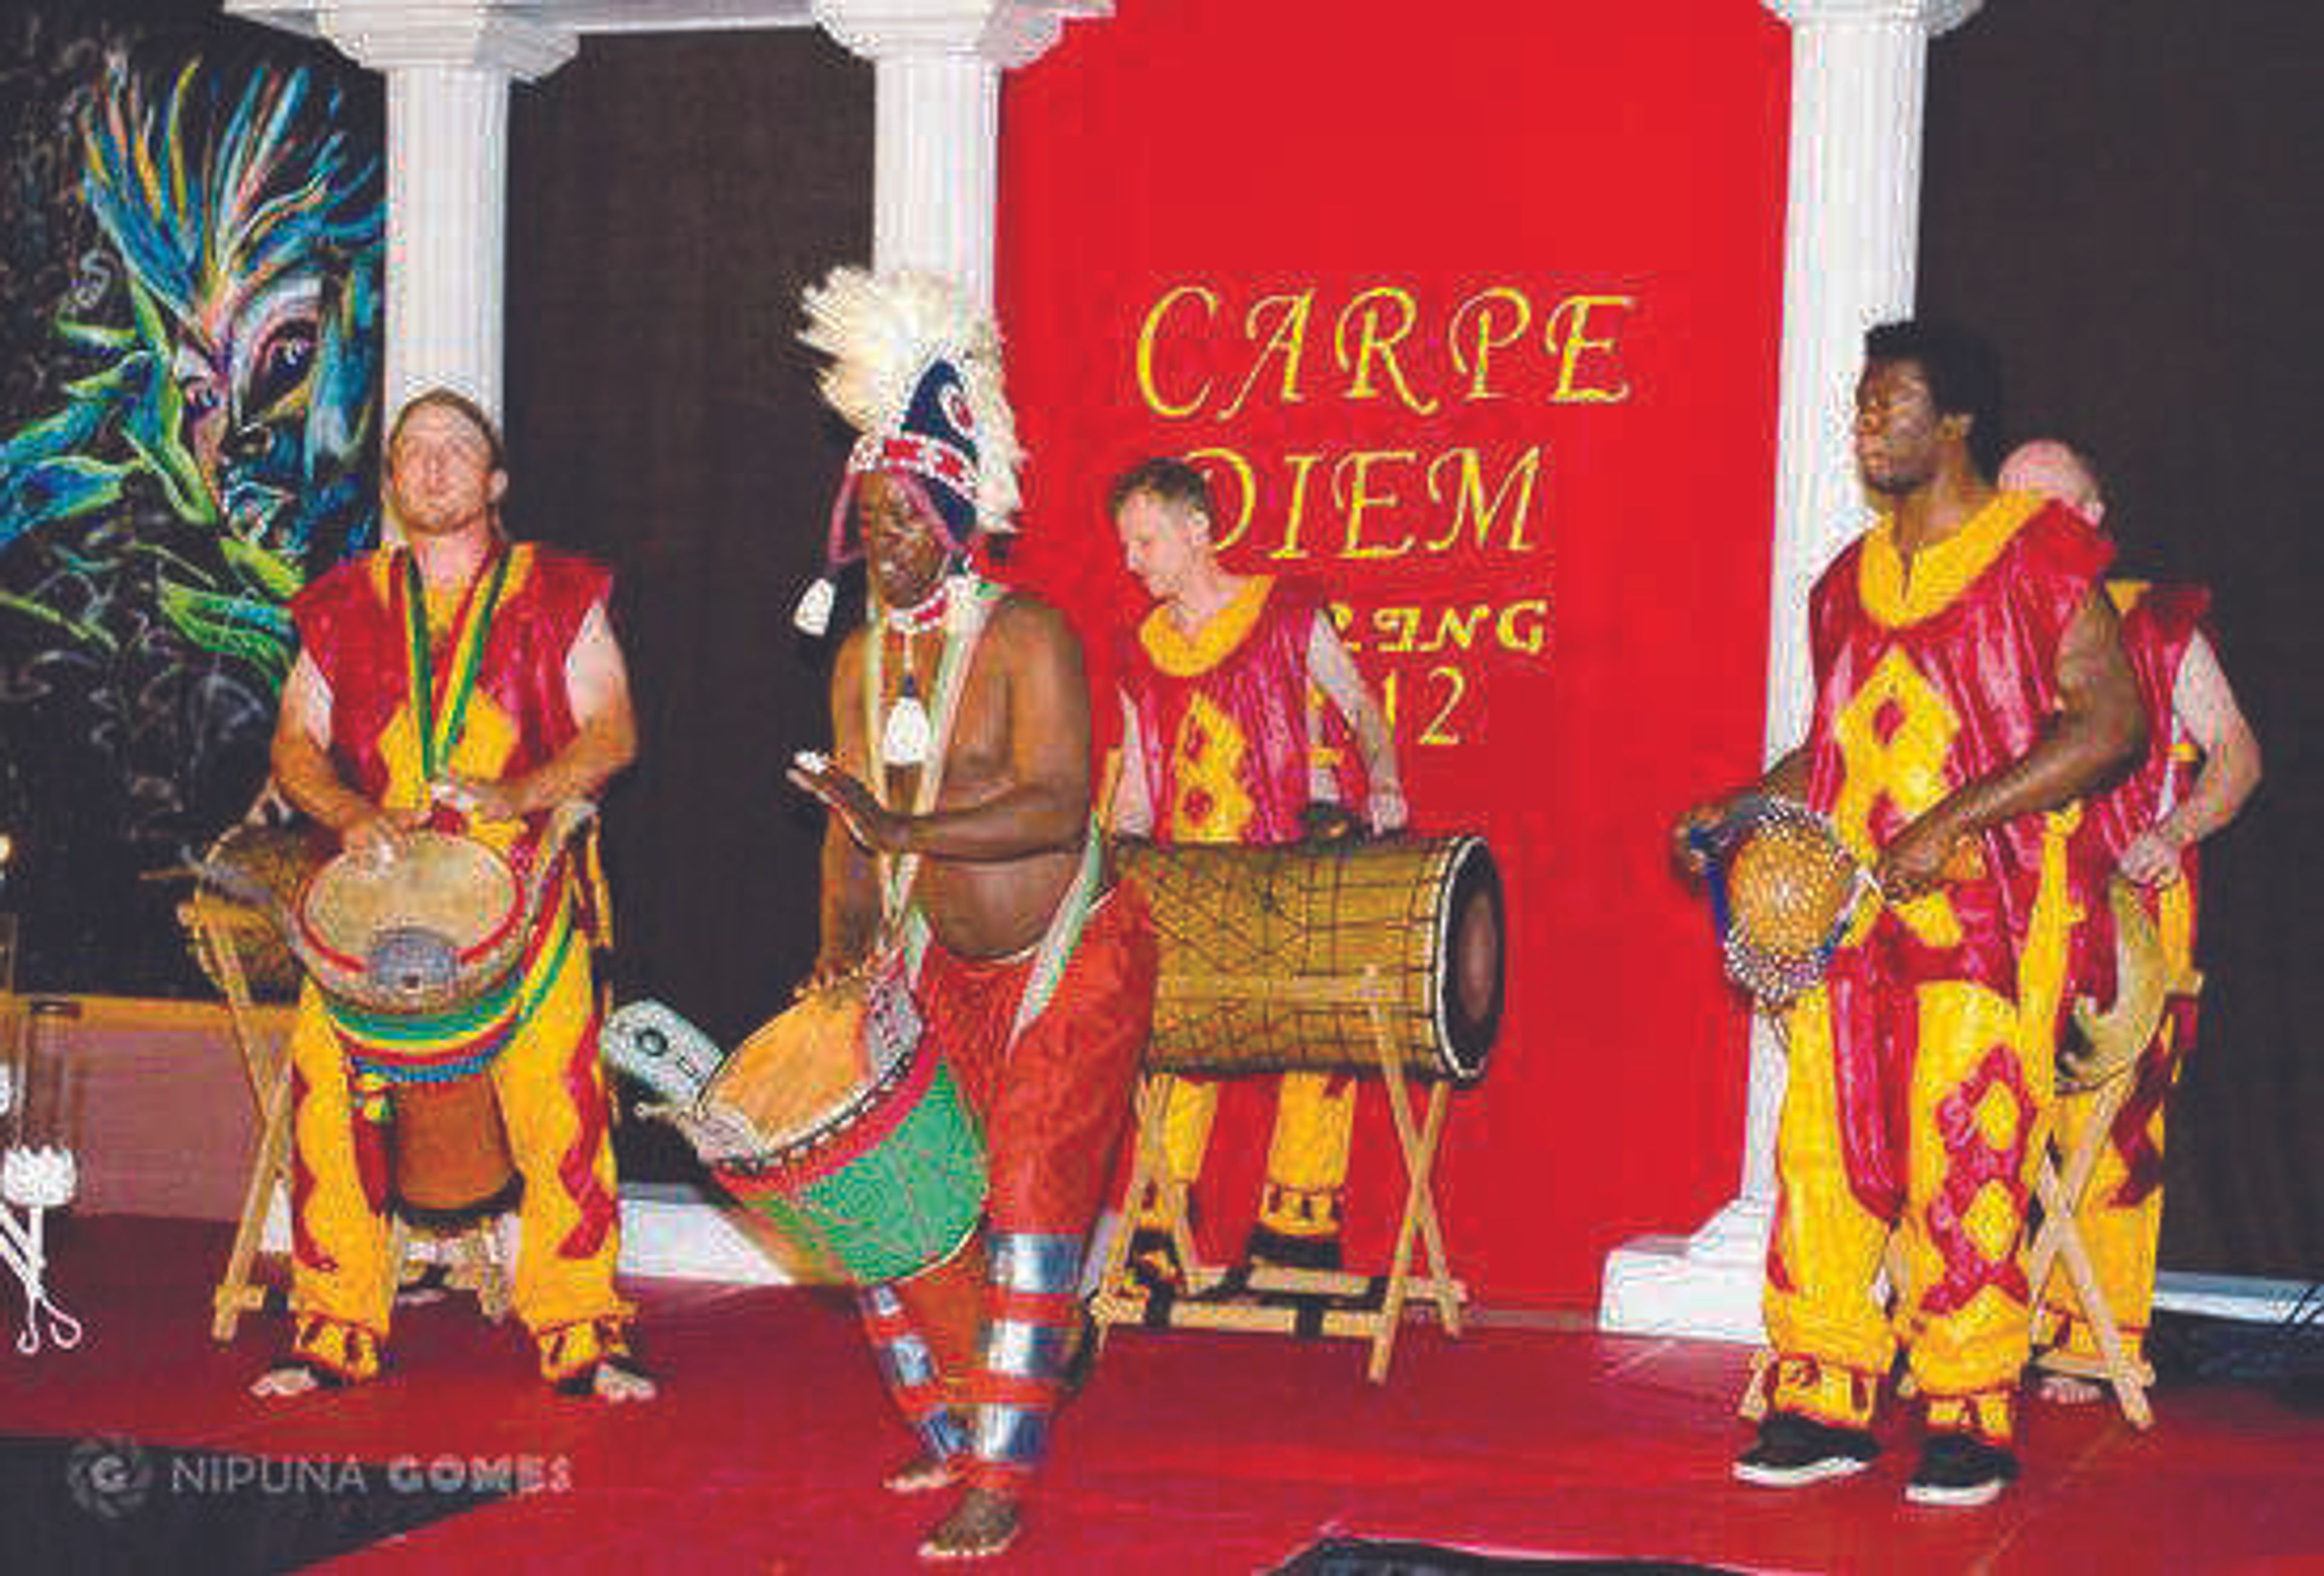 Carpe Diem event will feature multicultural food and dance